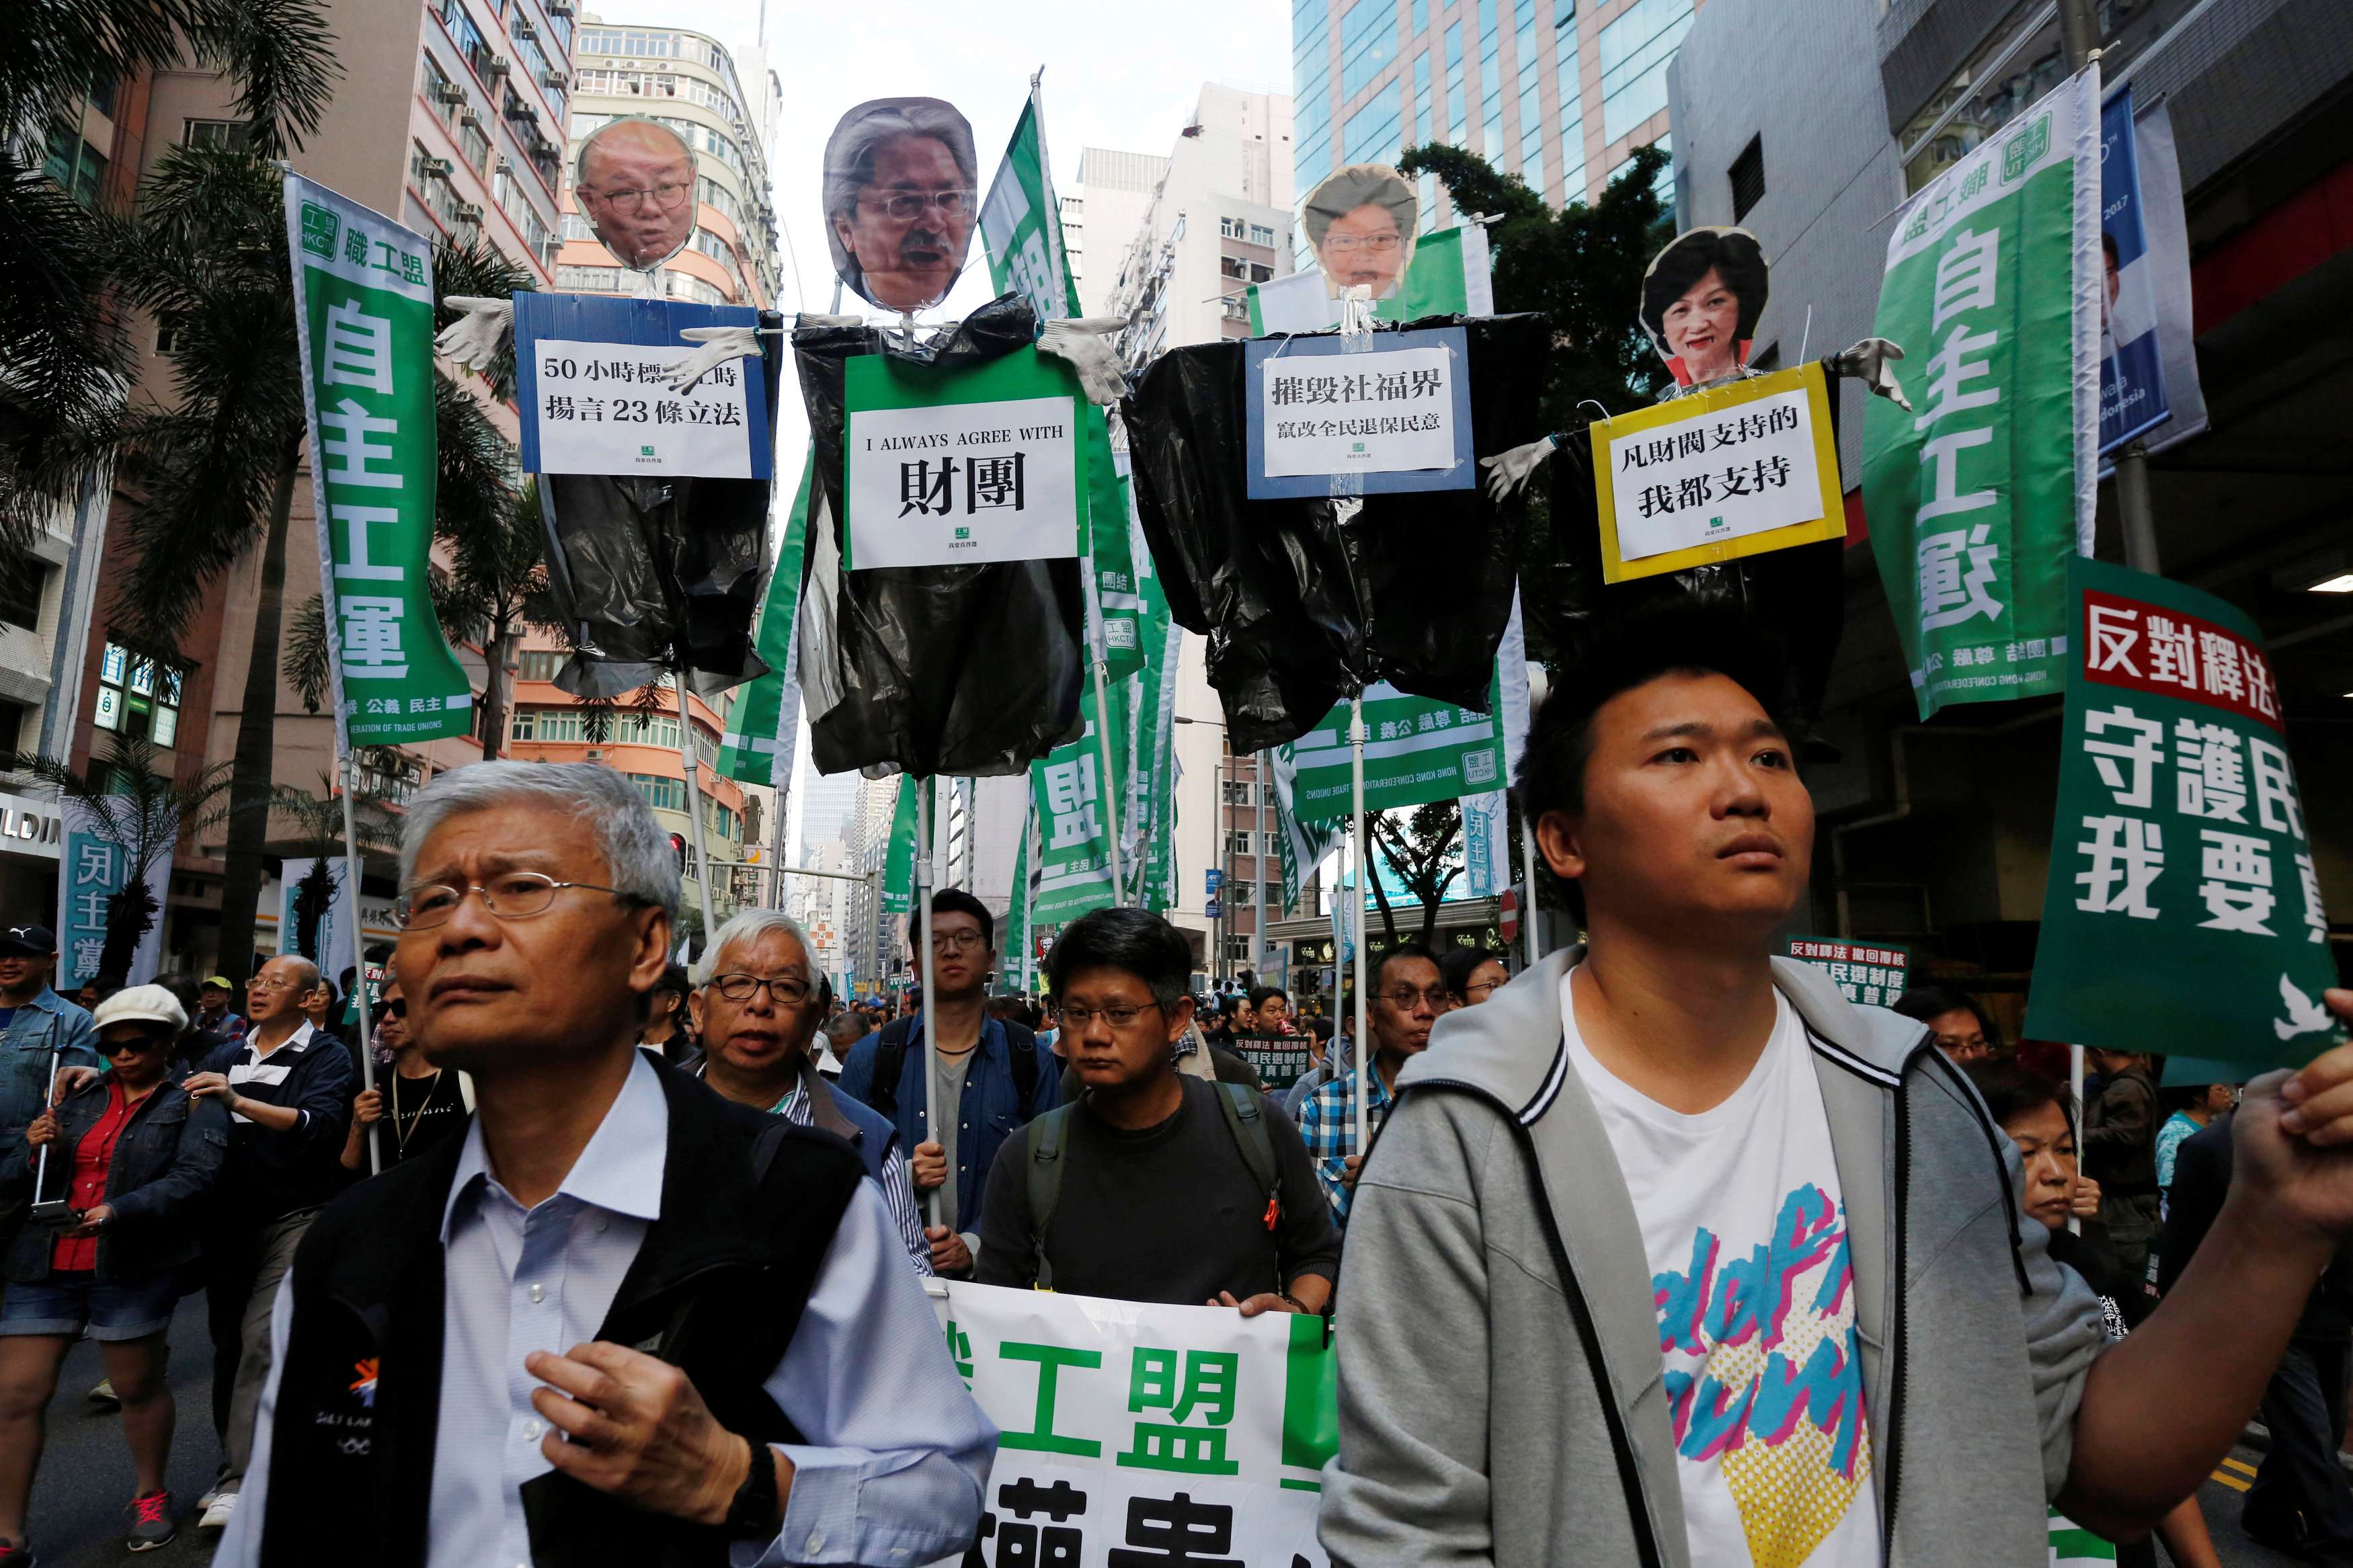 Protesters carry effigies of declared and then-potential chief executive candidates (from left) Woo Kwok-hing, John Tsang, Carrie Lam and Regina Ip, during a pro-democracy march in Hong Kong on January 1. Photo: Reuters